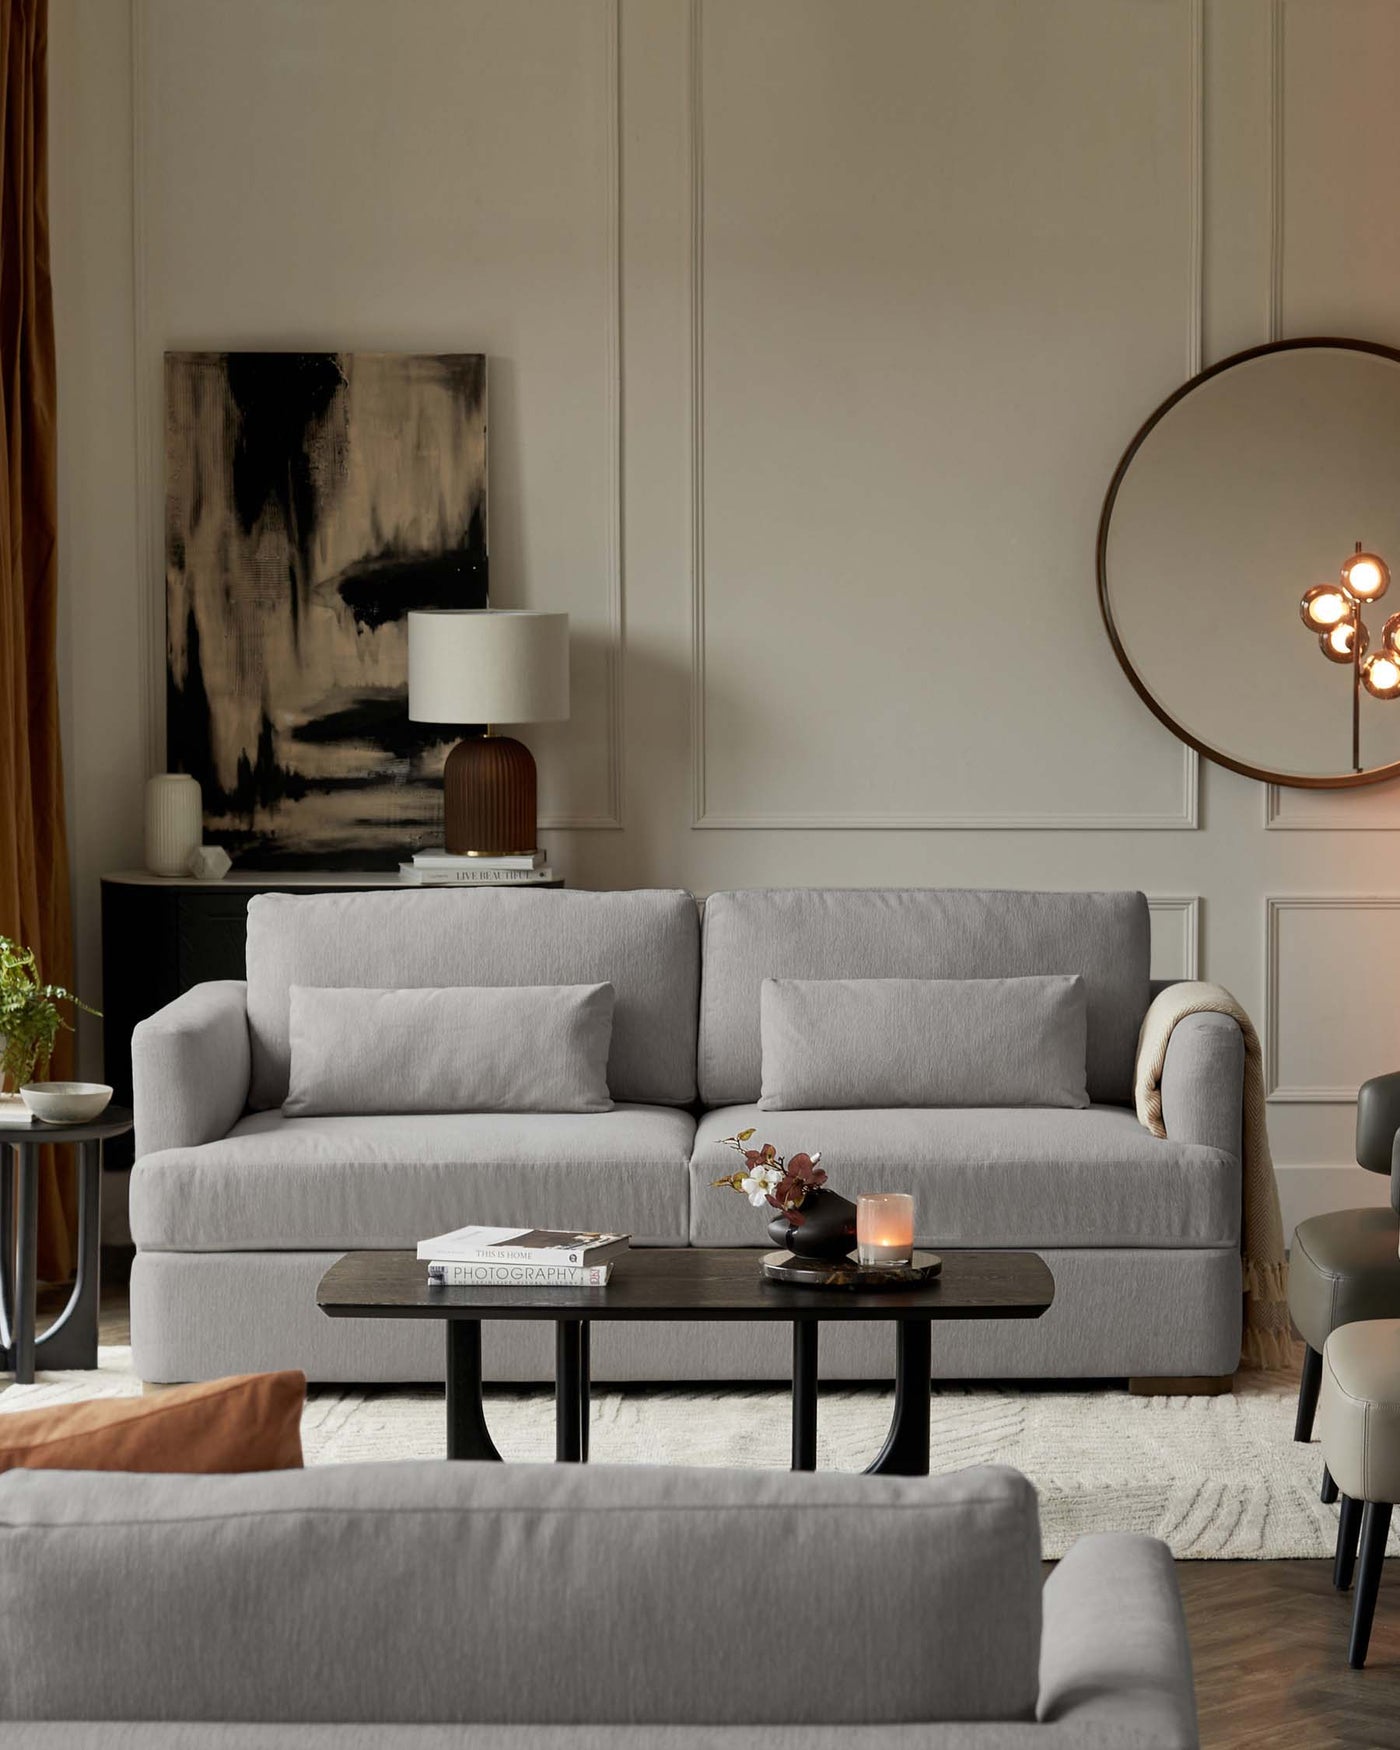 Modern living room featuring a plush grey three-seater sofa with matching armchairs, a sleek black oval coffee table, and an elegant round side table with a decorative lamp.